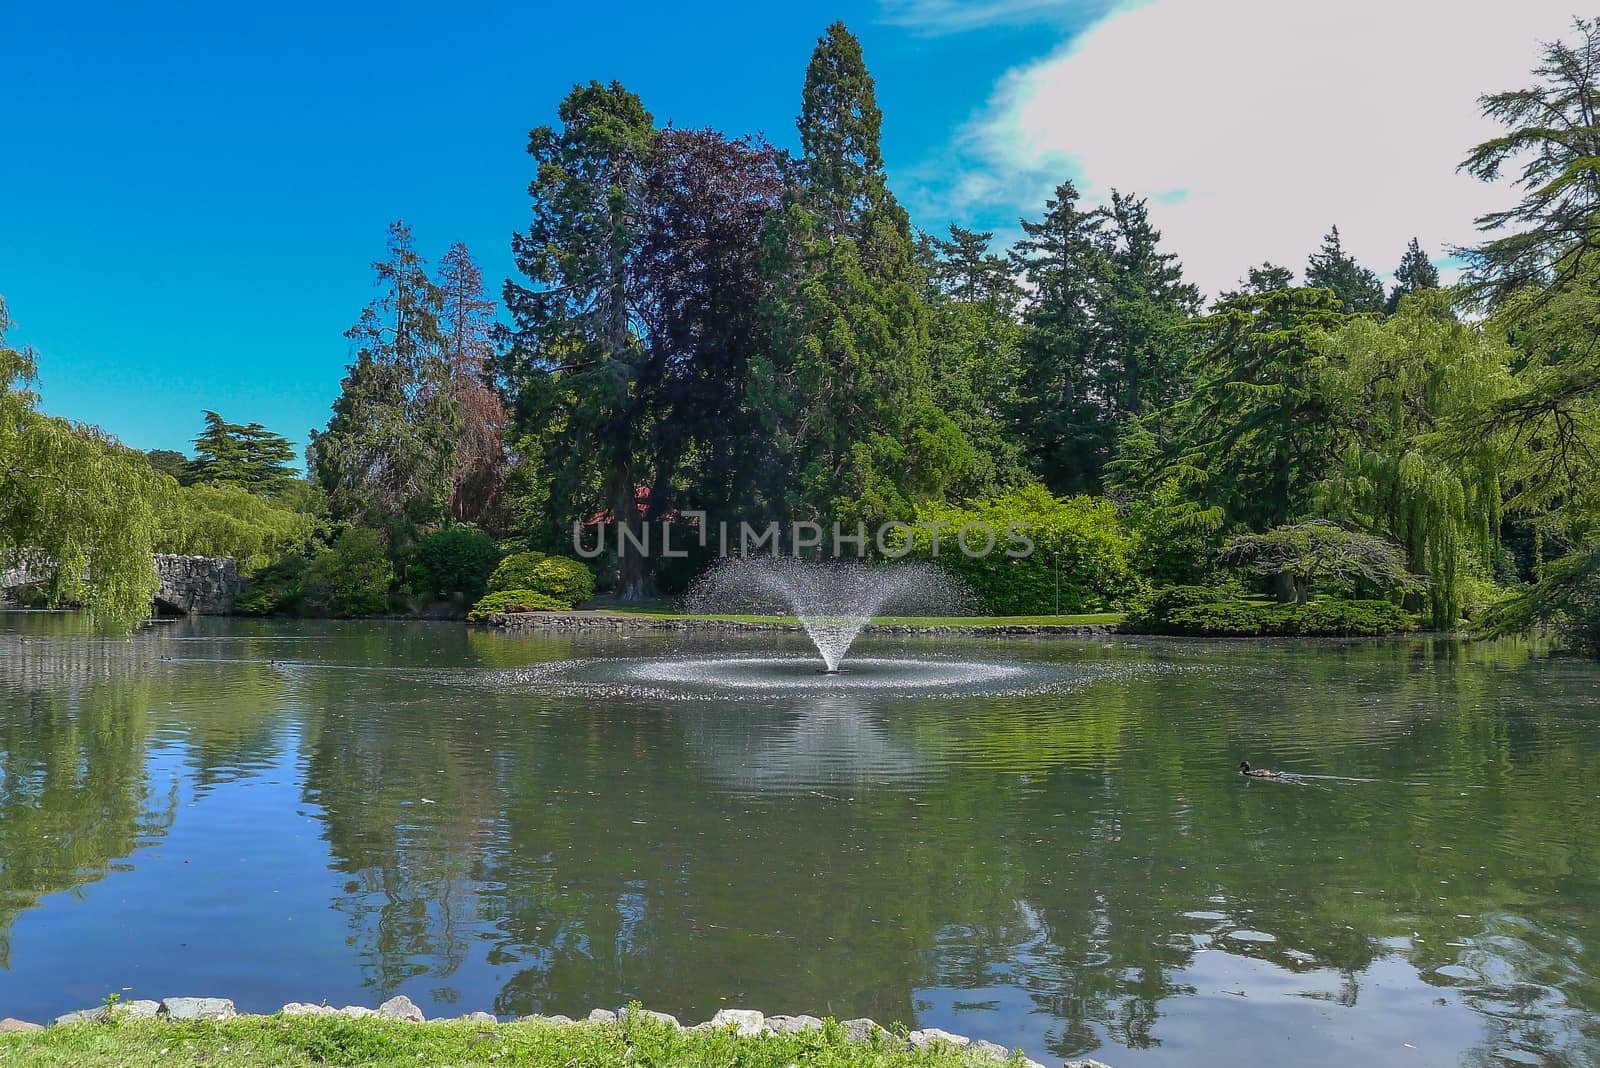 Lake in a park in Victoria, Vancouver Island by chrisukphoto